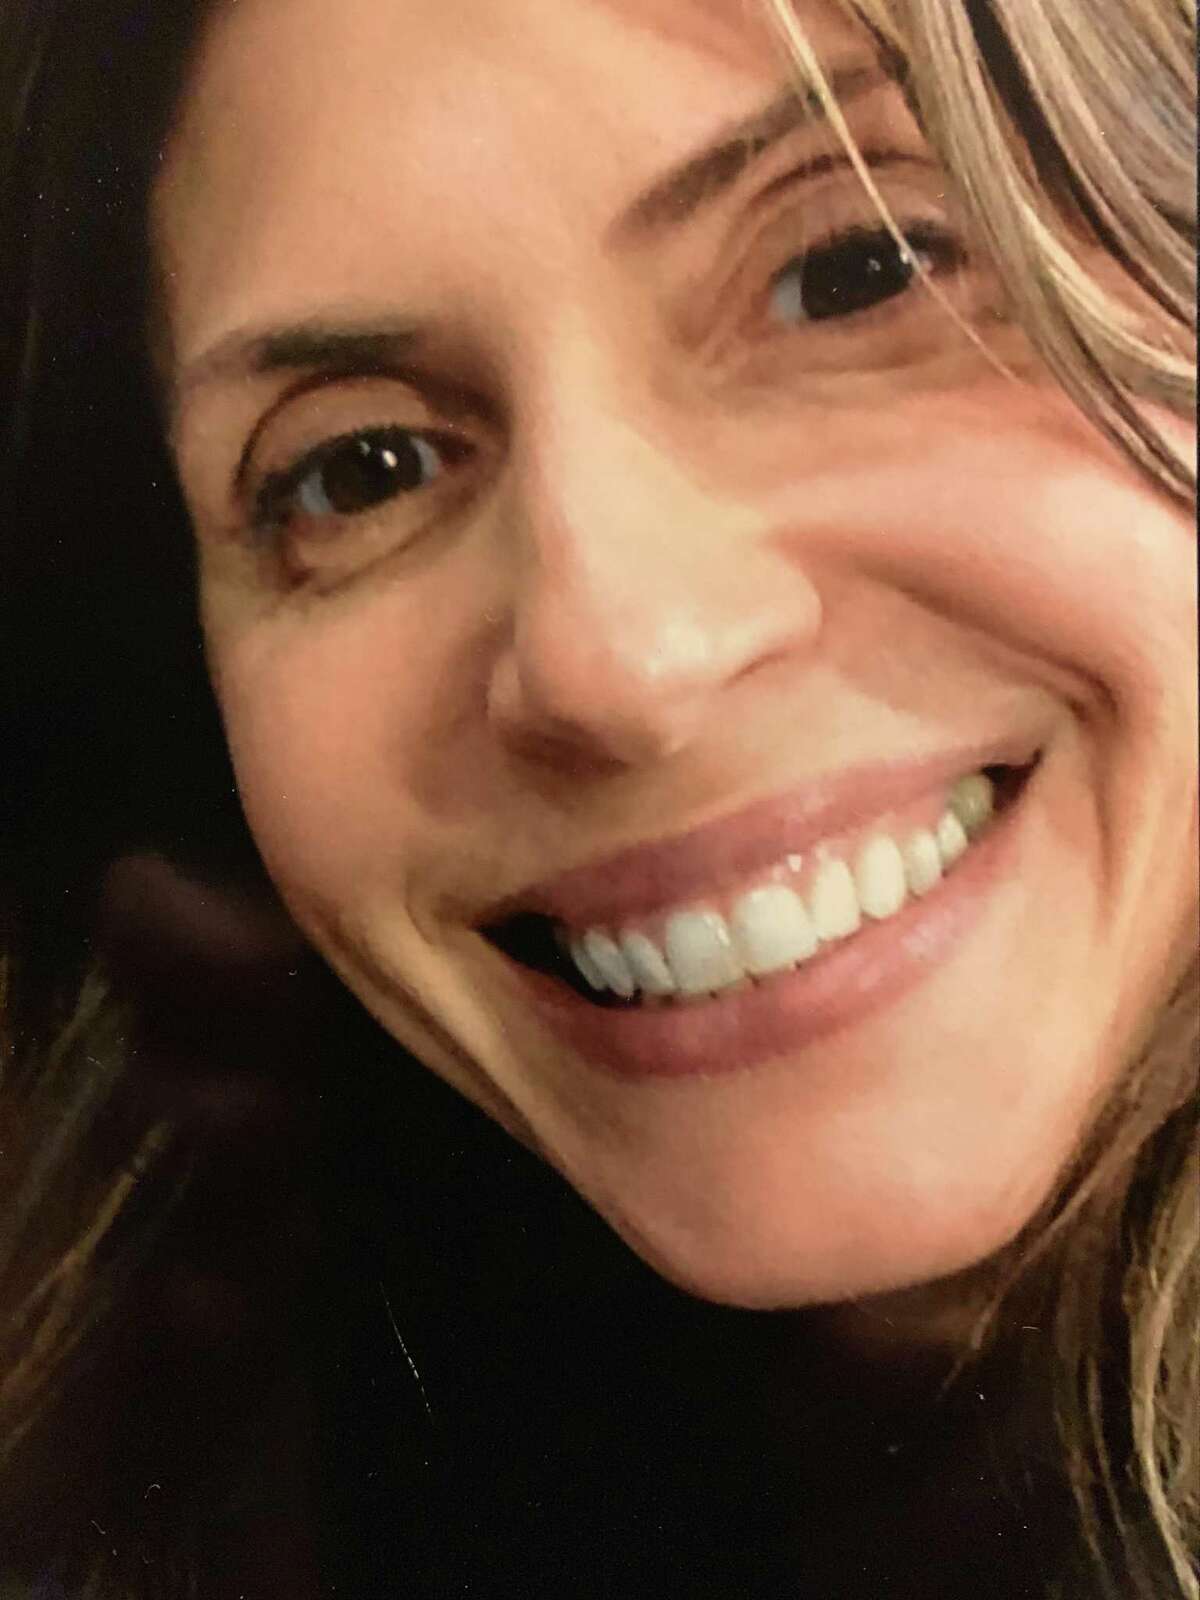 An episode of “Real Life Nightmare” will focus on the disappearance of New Canaan mother Jennifer Dulos, who went missing in May 2019. The episode airs at 9 p.m. on CNN Headline News.